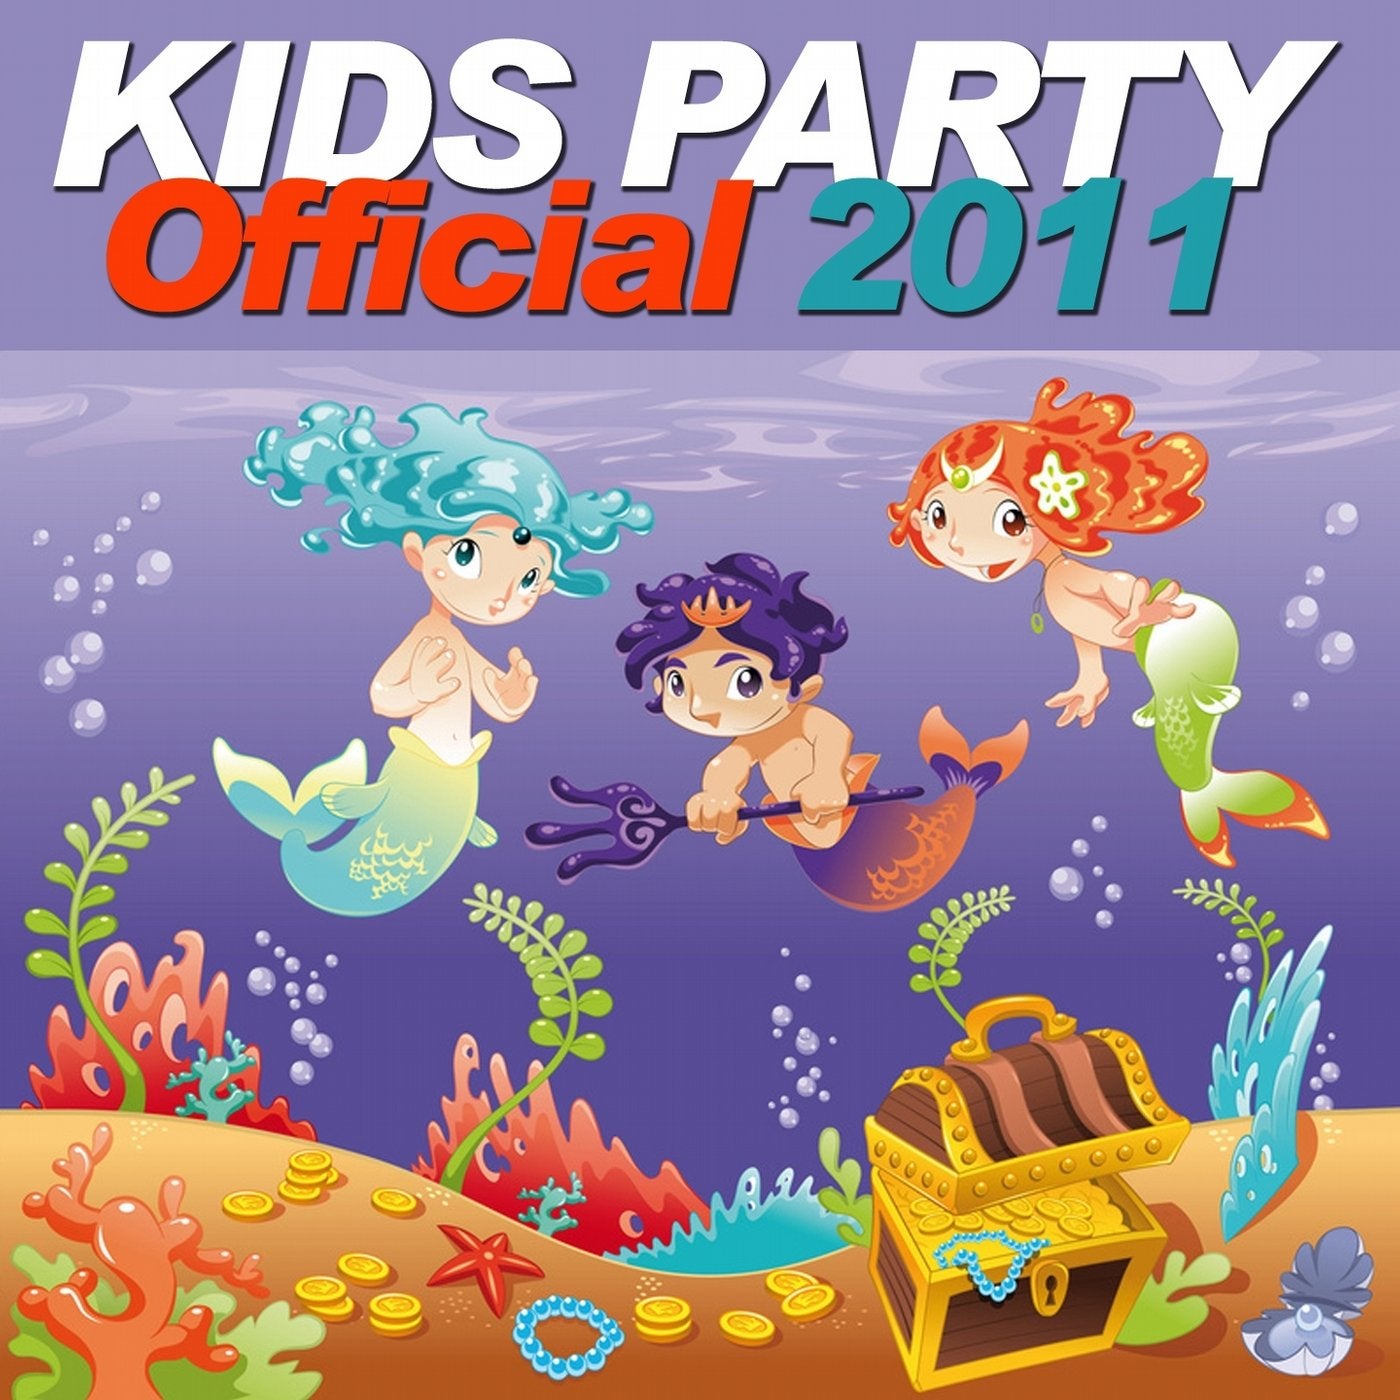 Kids Party Official 2011